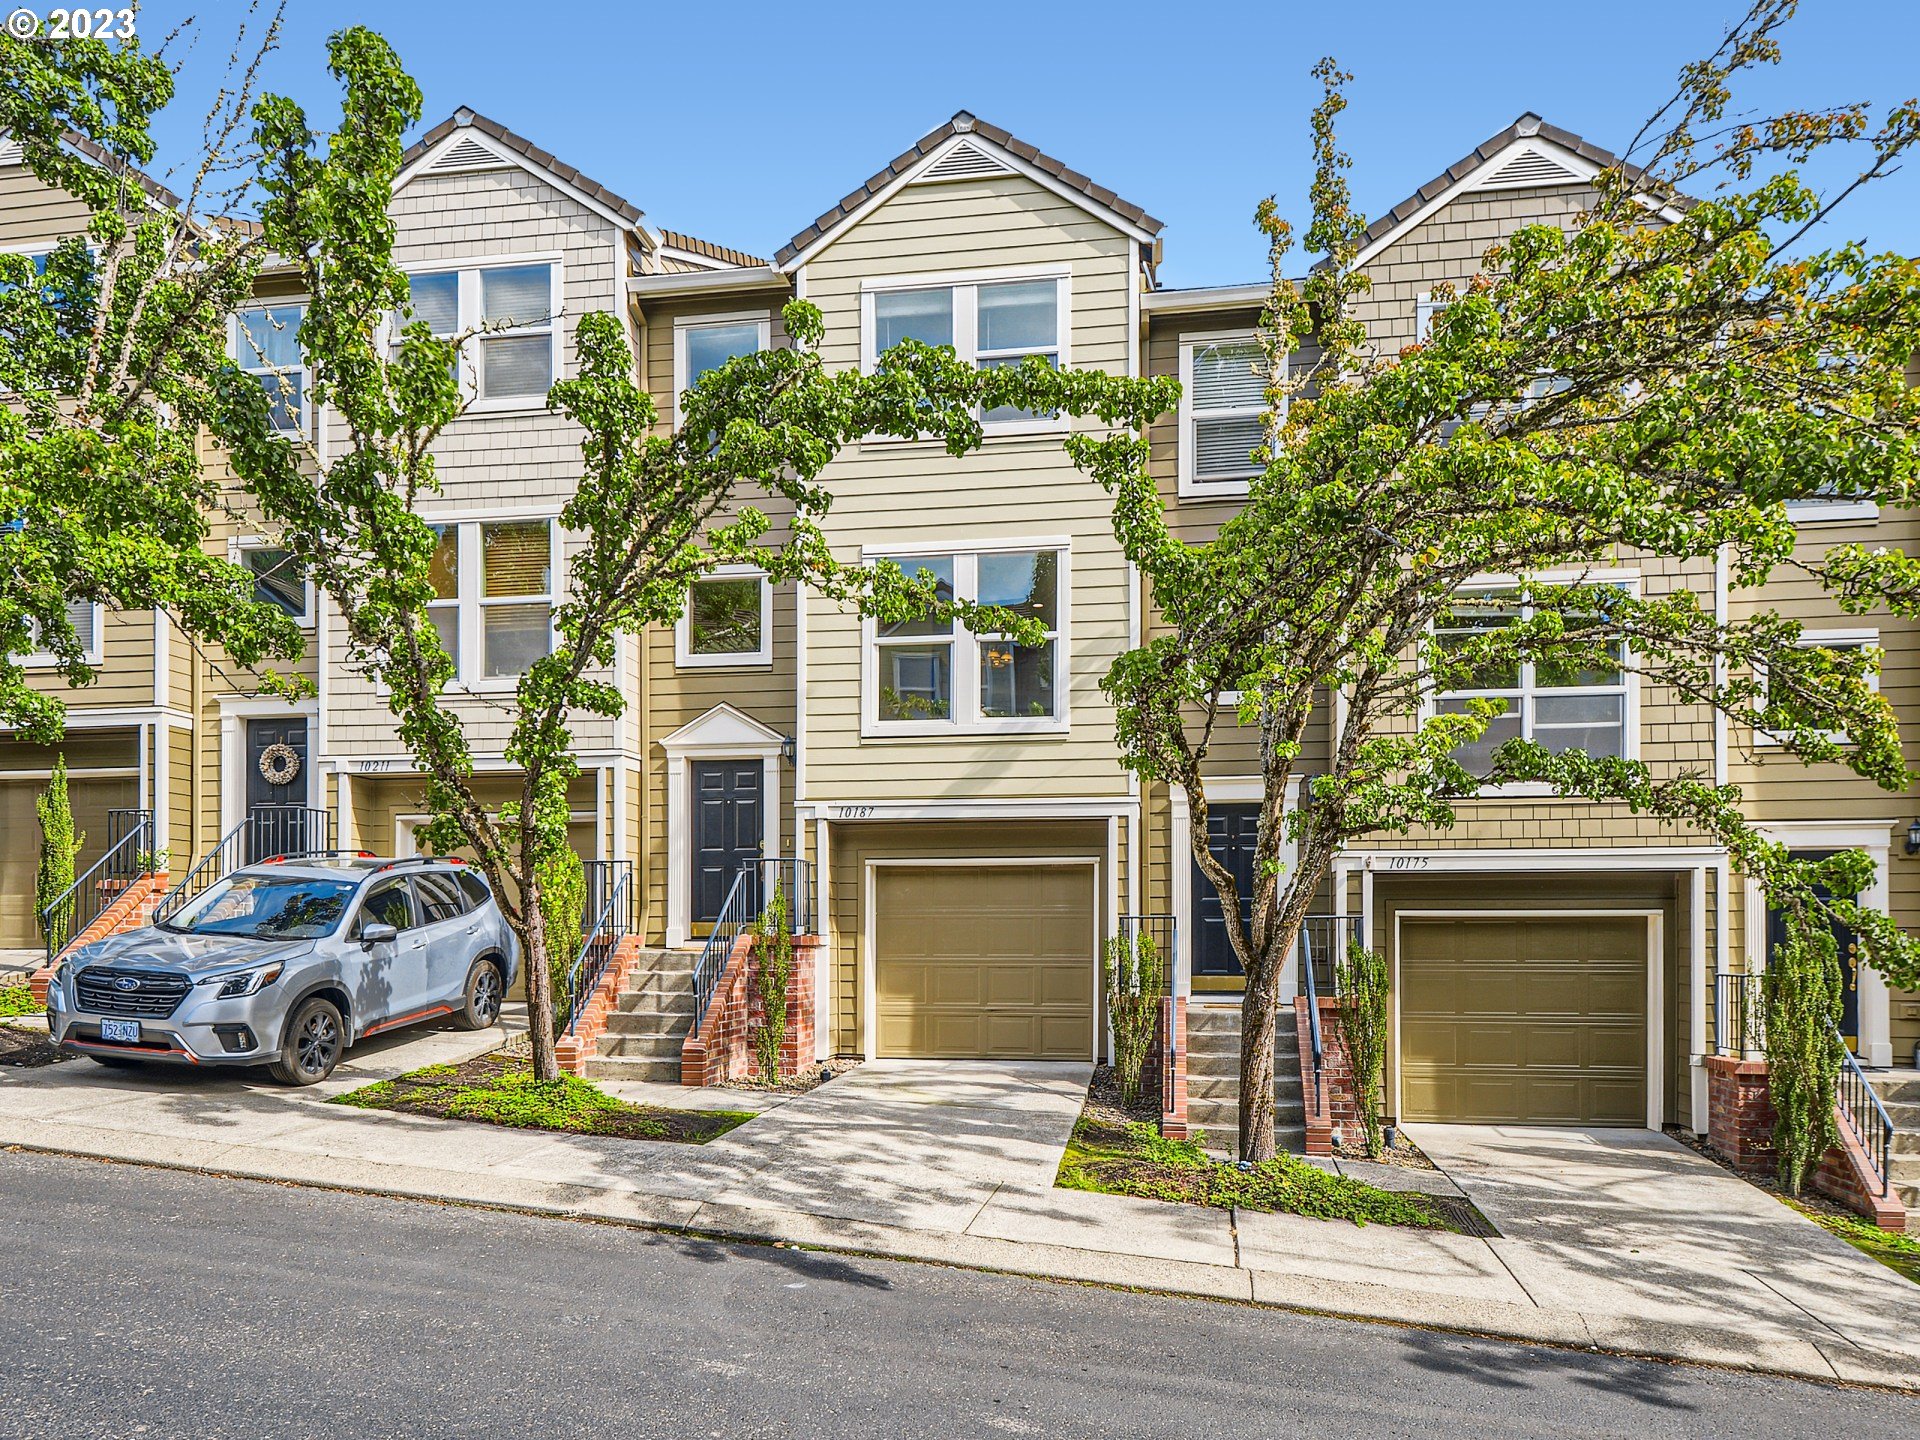 10187 NW WILSHIRE LN Unit: 39, Portland OR, 97229